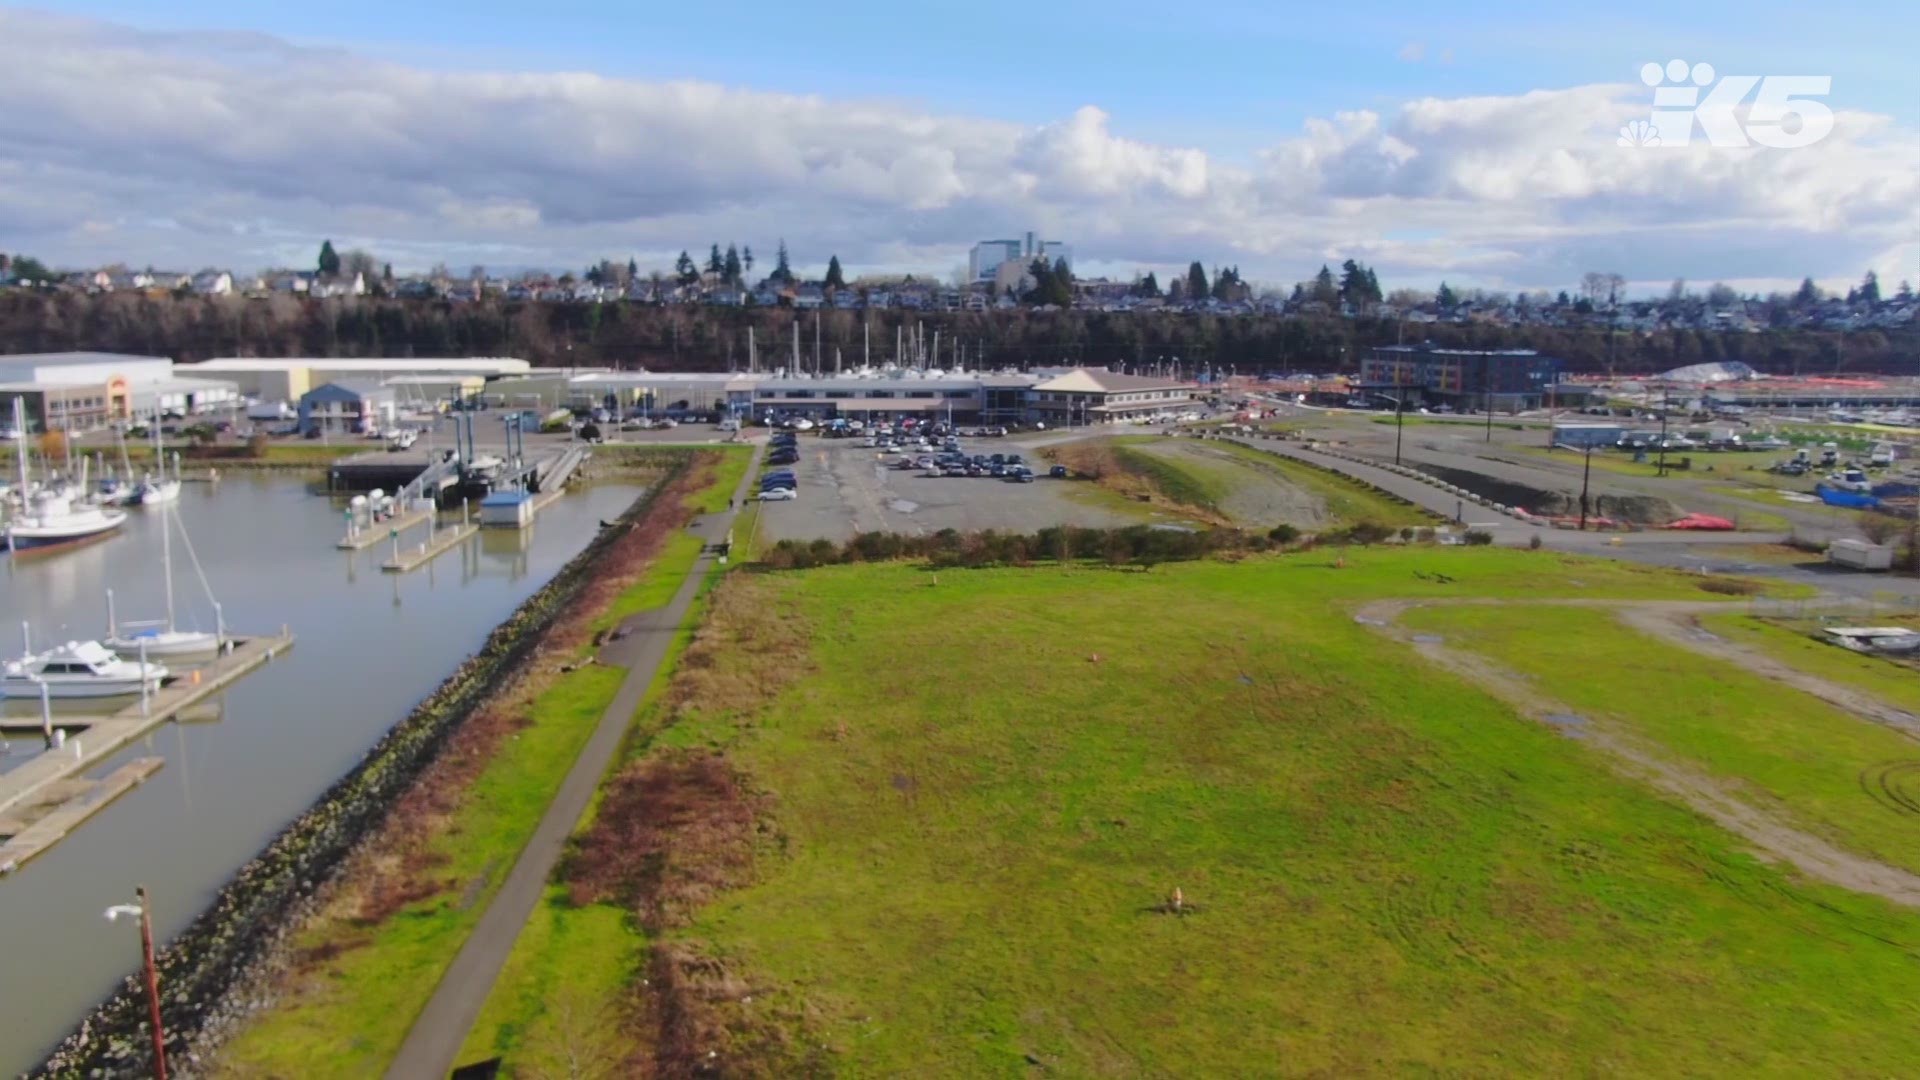 Up to 660 apartments, condos, and townhomes are planned for Everett's waterfront, along with 10 restaurants, an amphitheater, as well as office and retail space.